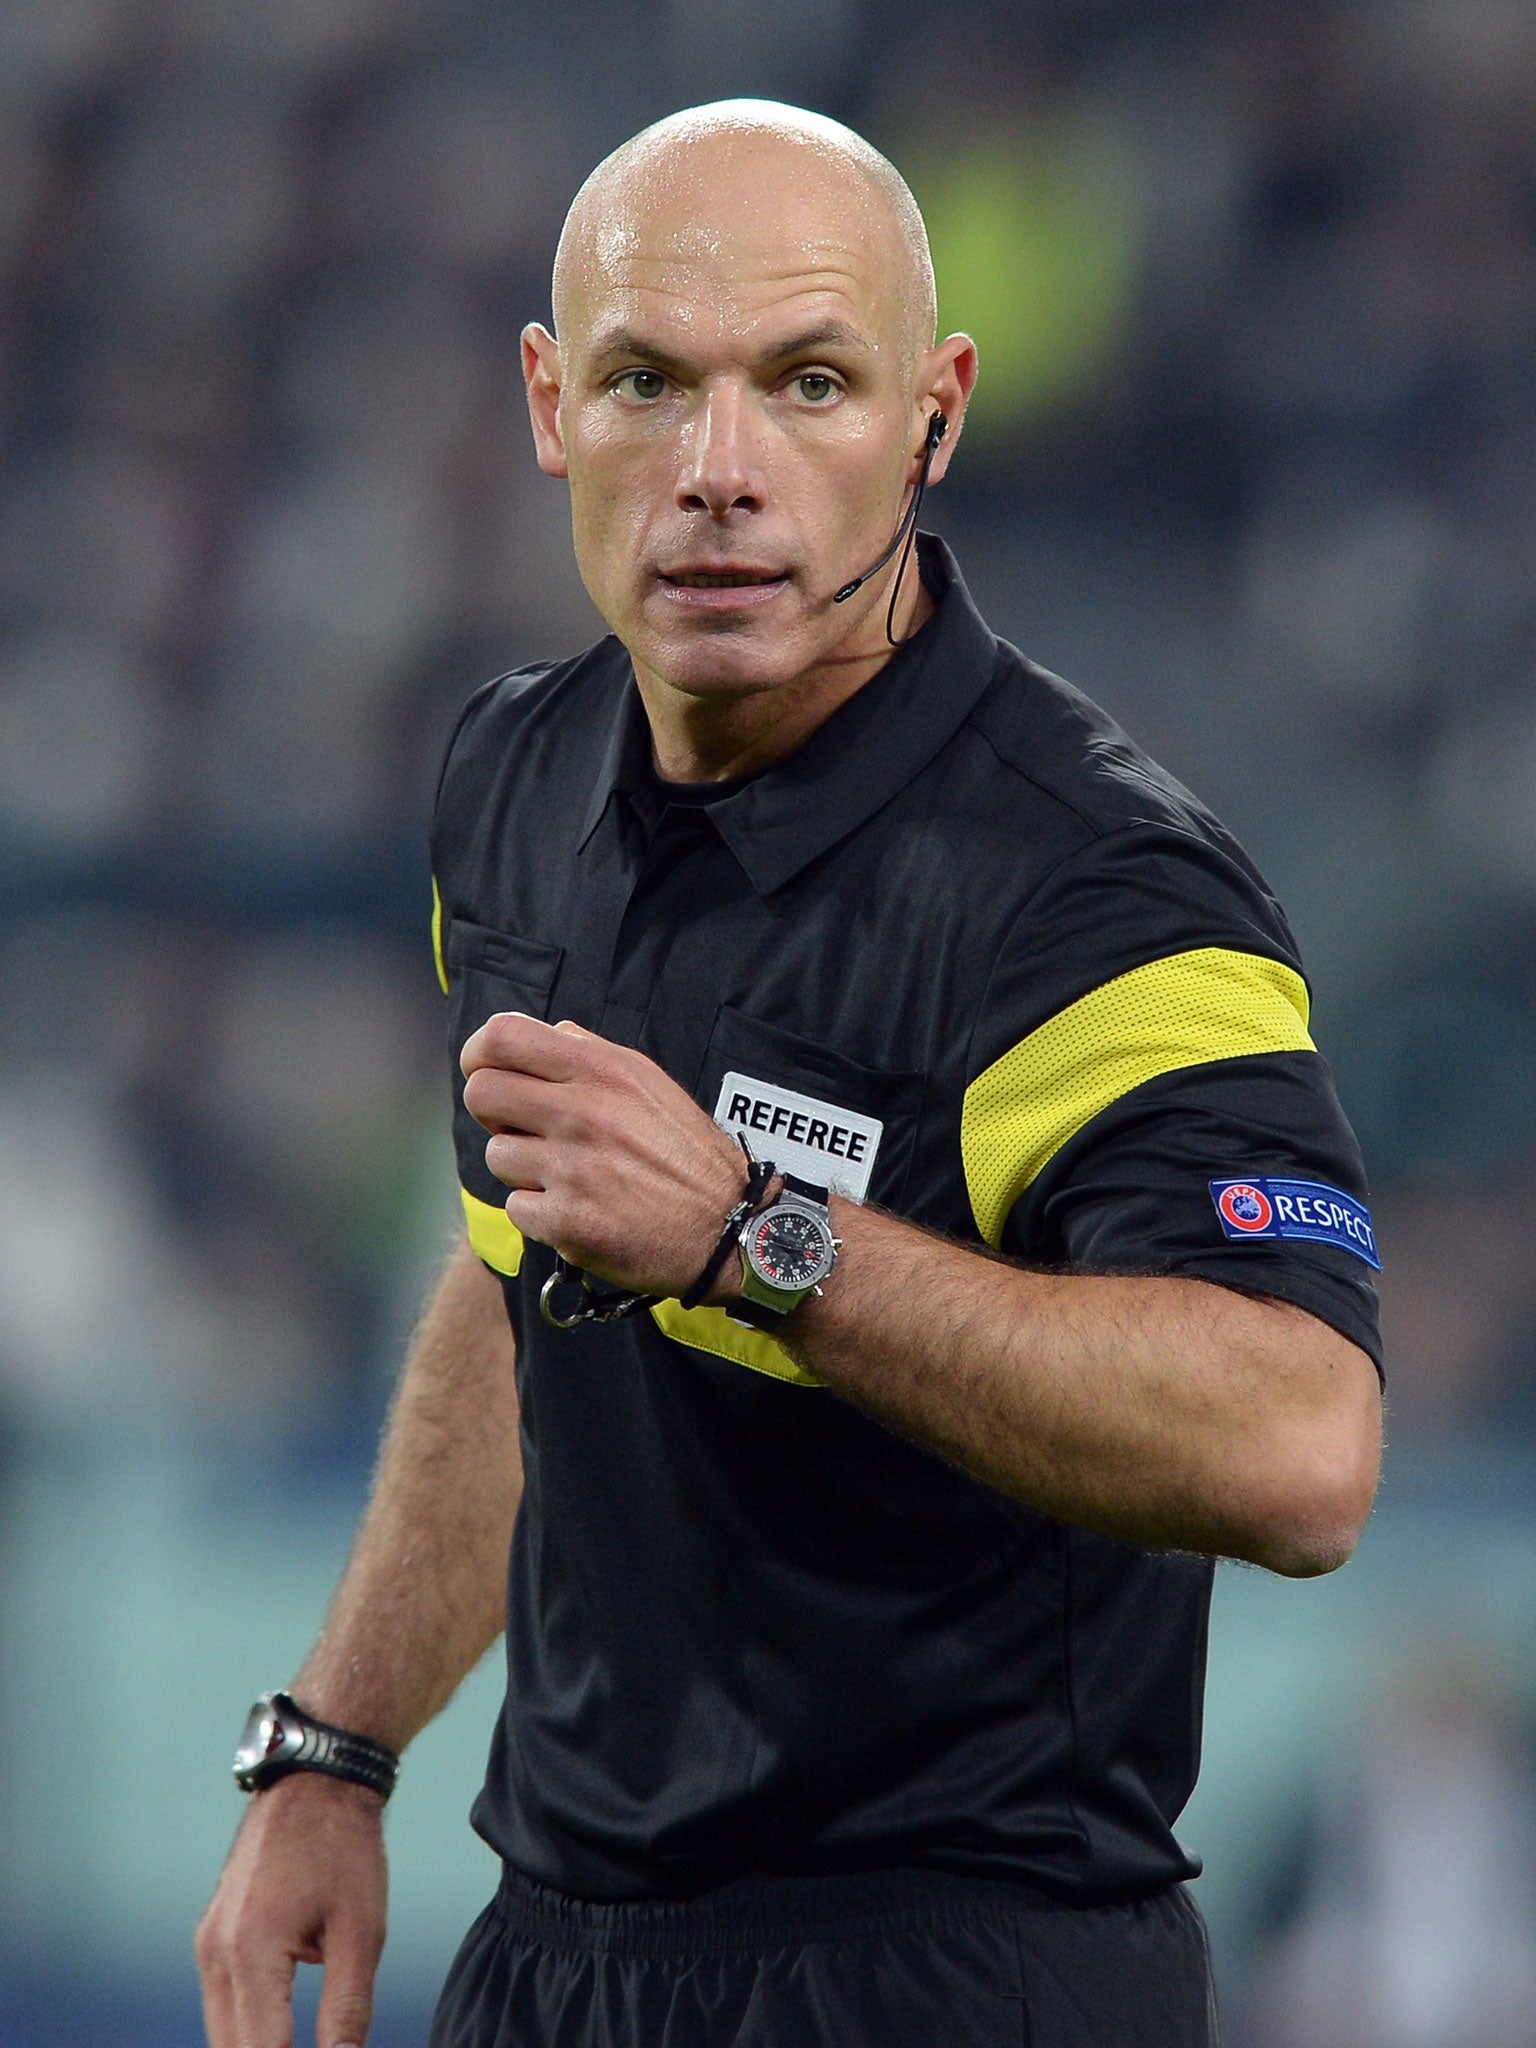 Howard Webb is the referee for Sweden's tie